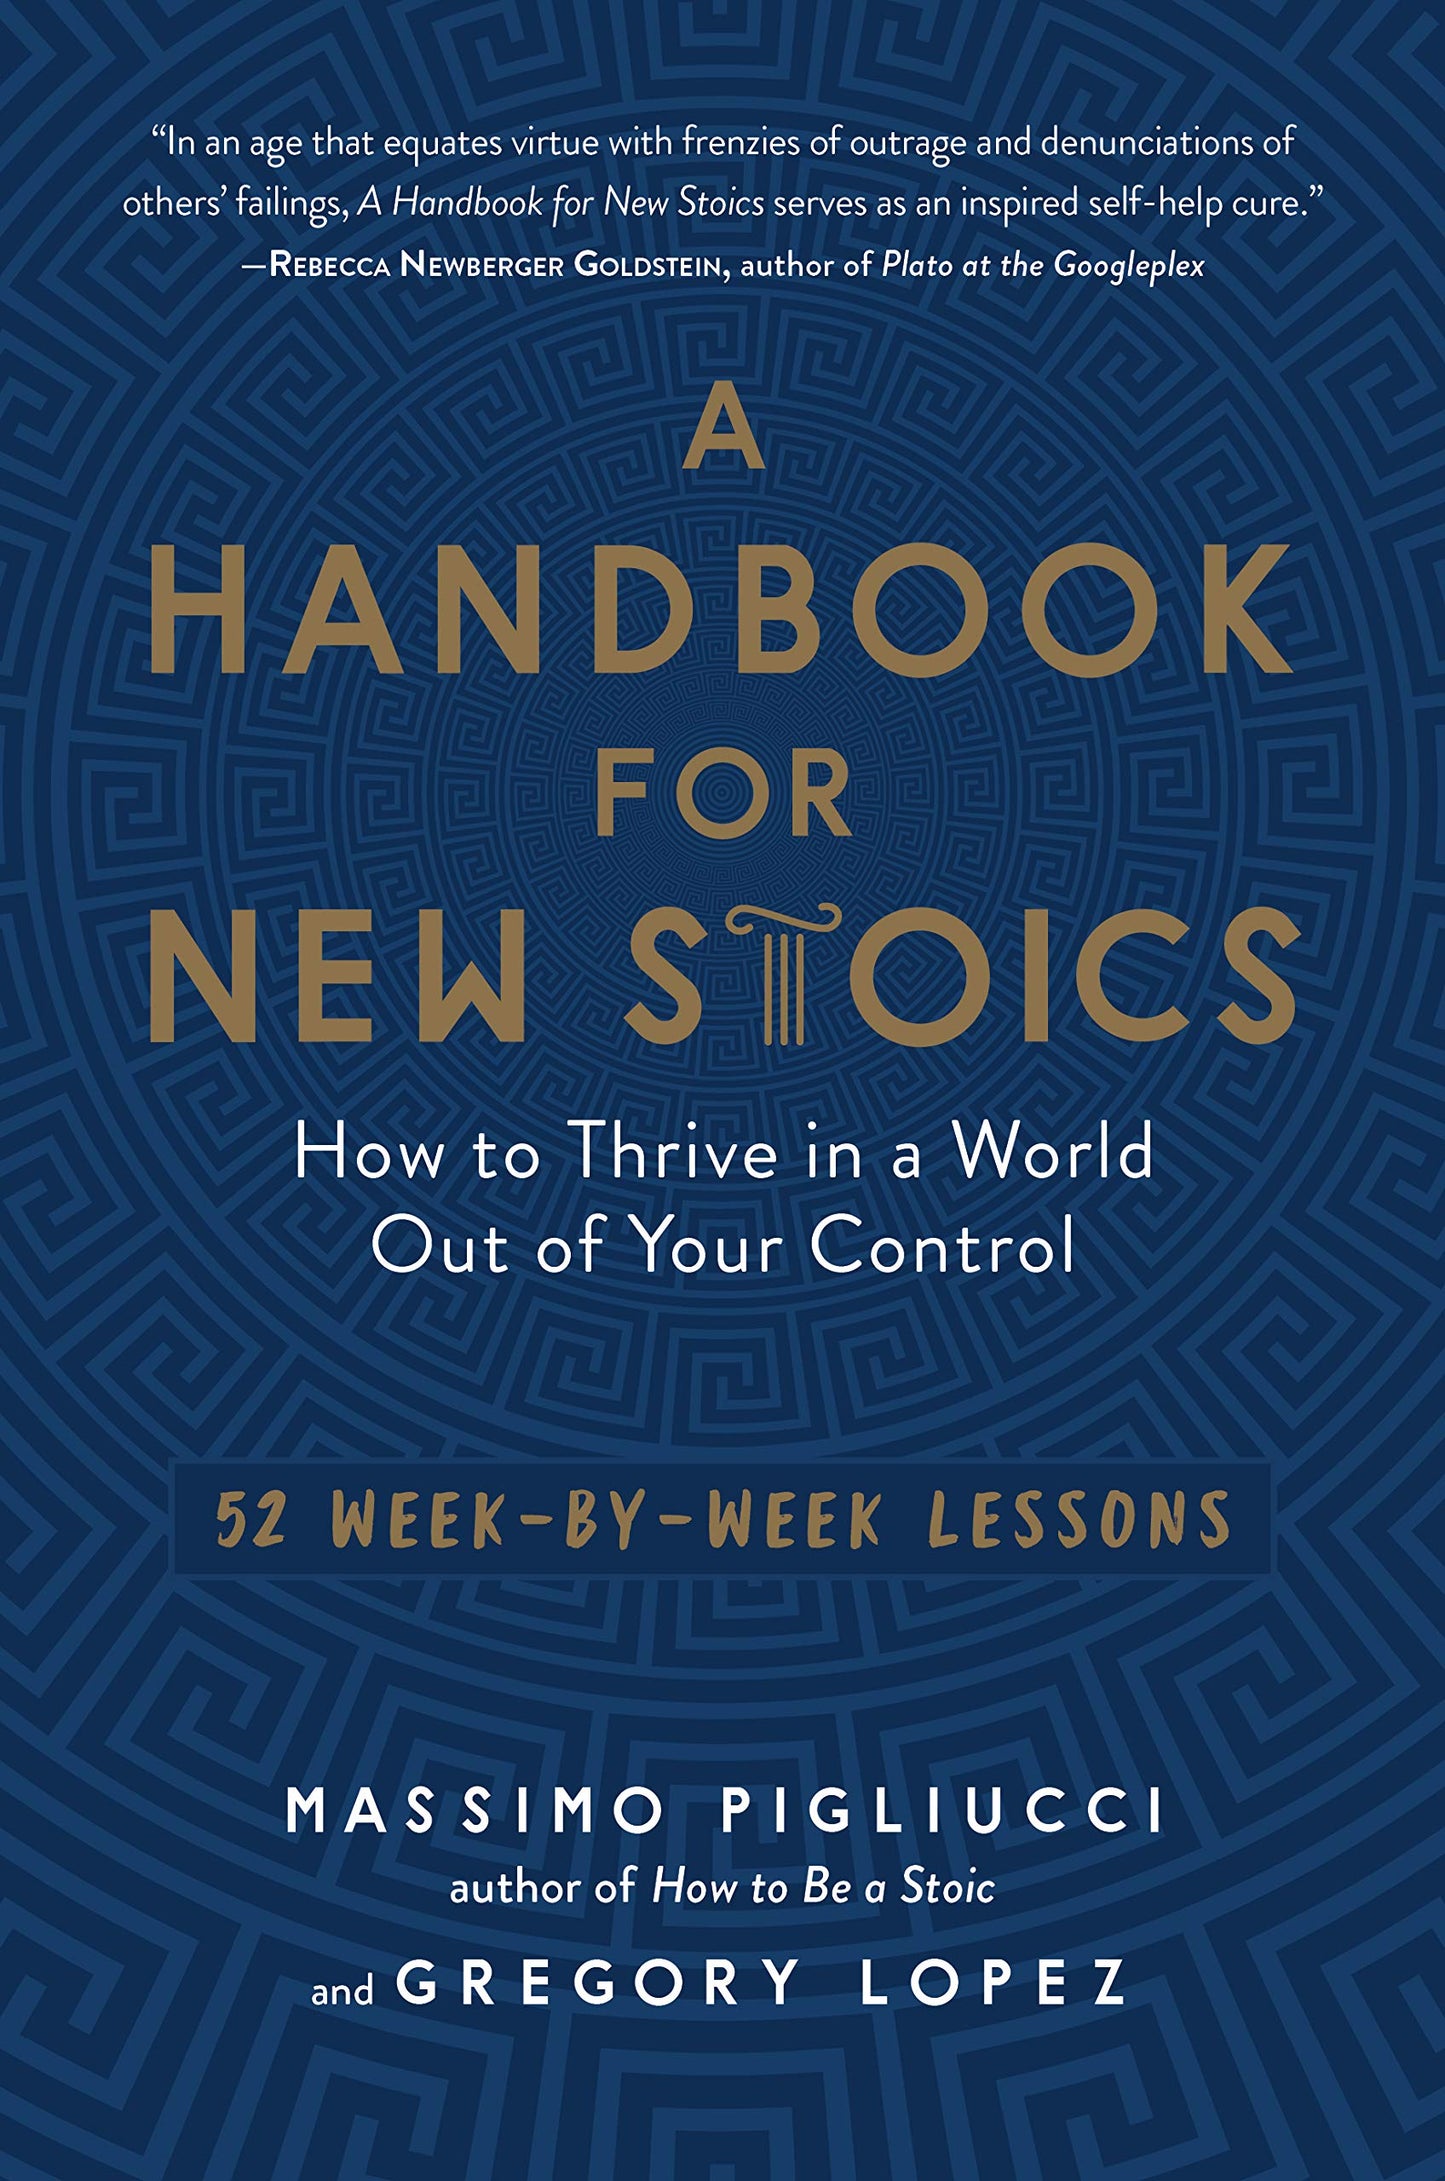 Handbook for New Stoics: How to Thrive in a World Out of Your Control--52 Week-By-Week Lessons